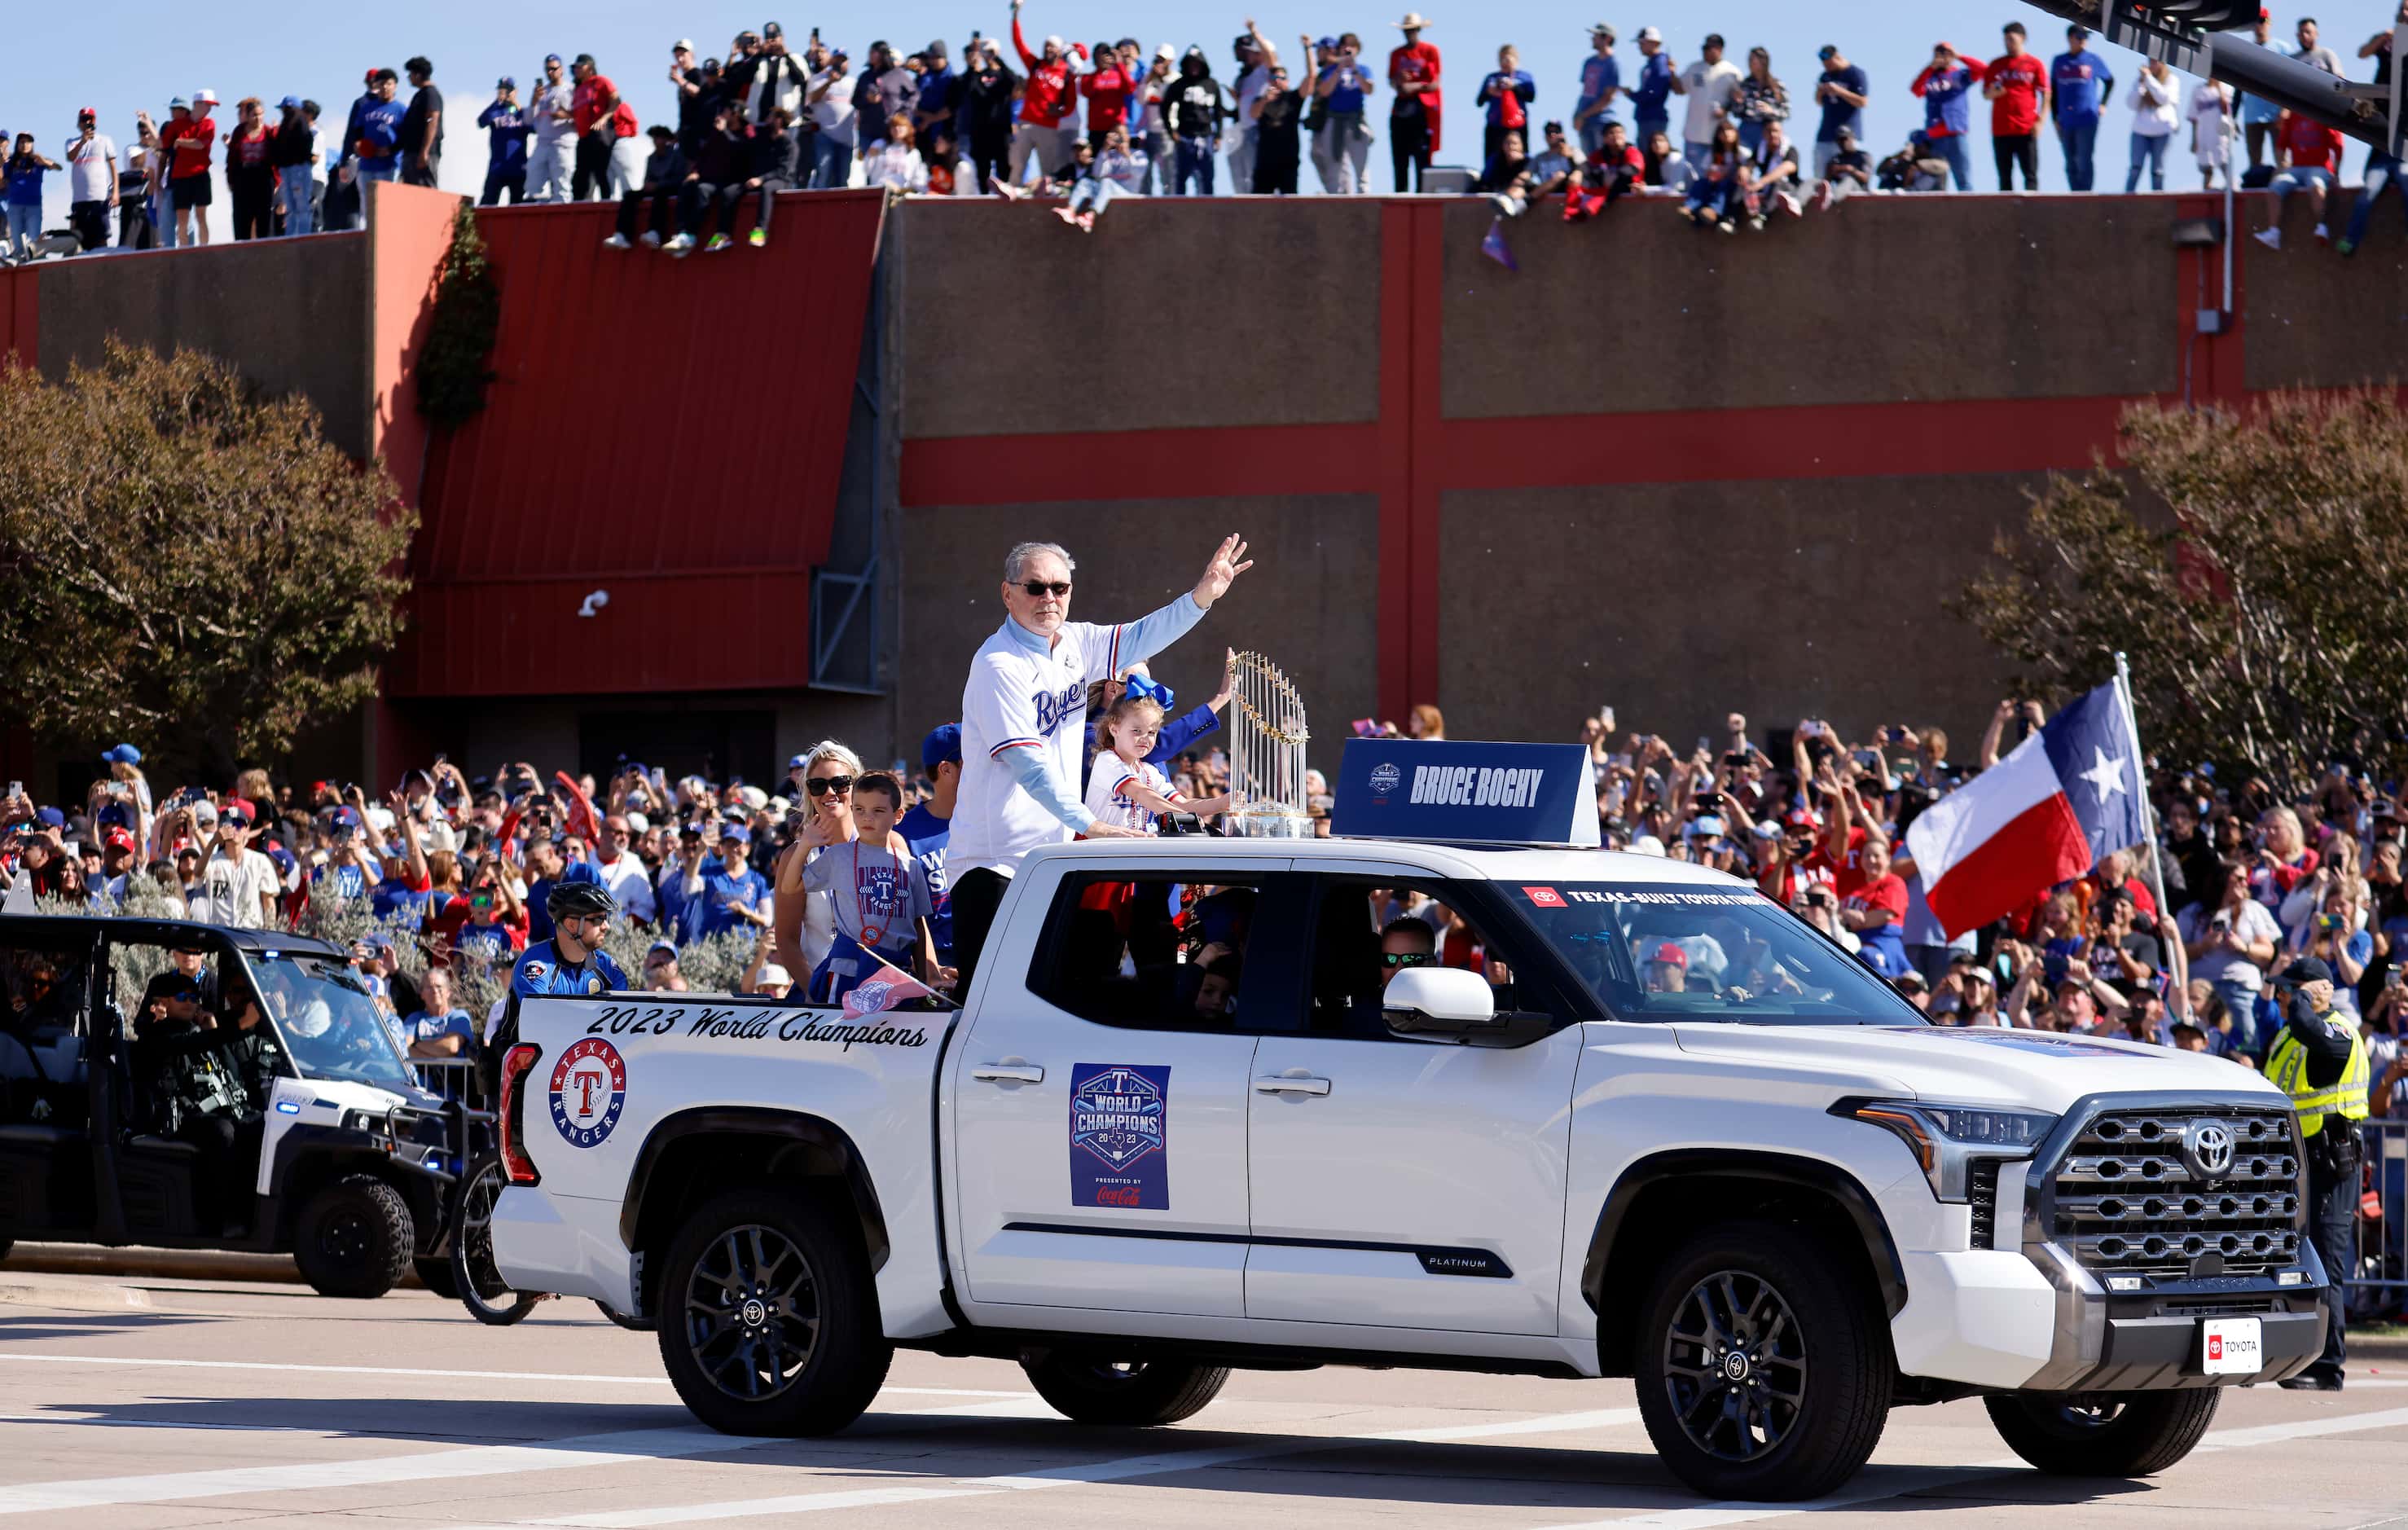 Riding with the Commissioner's Trophy, Texas Rangers manager Bruce Bochy waves to fans...